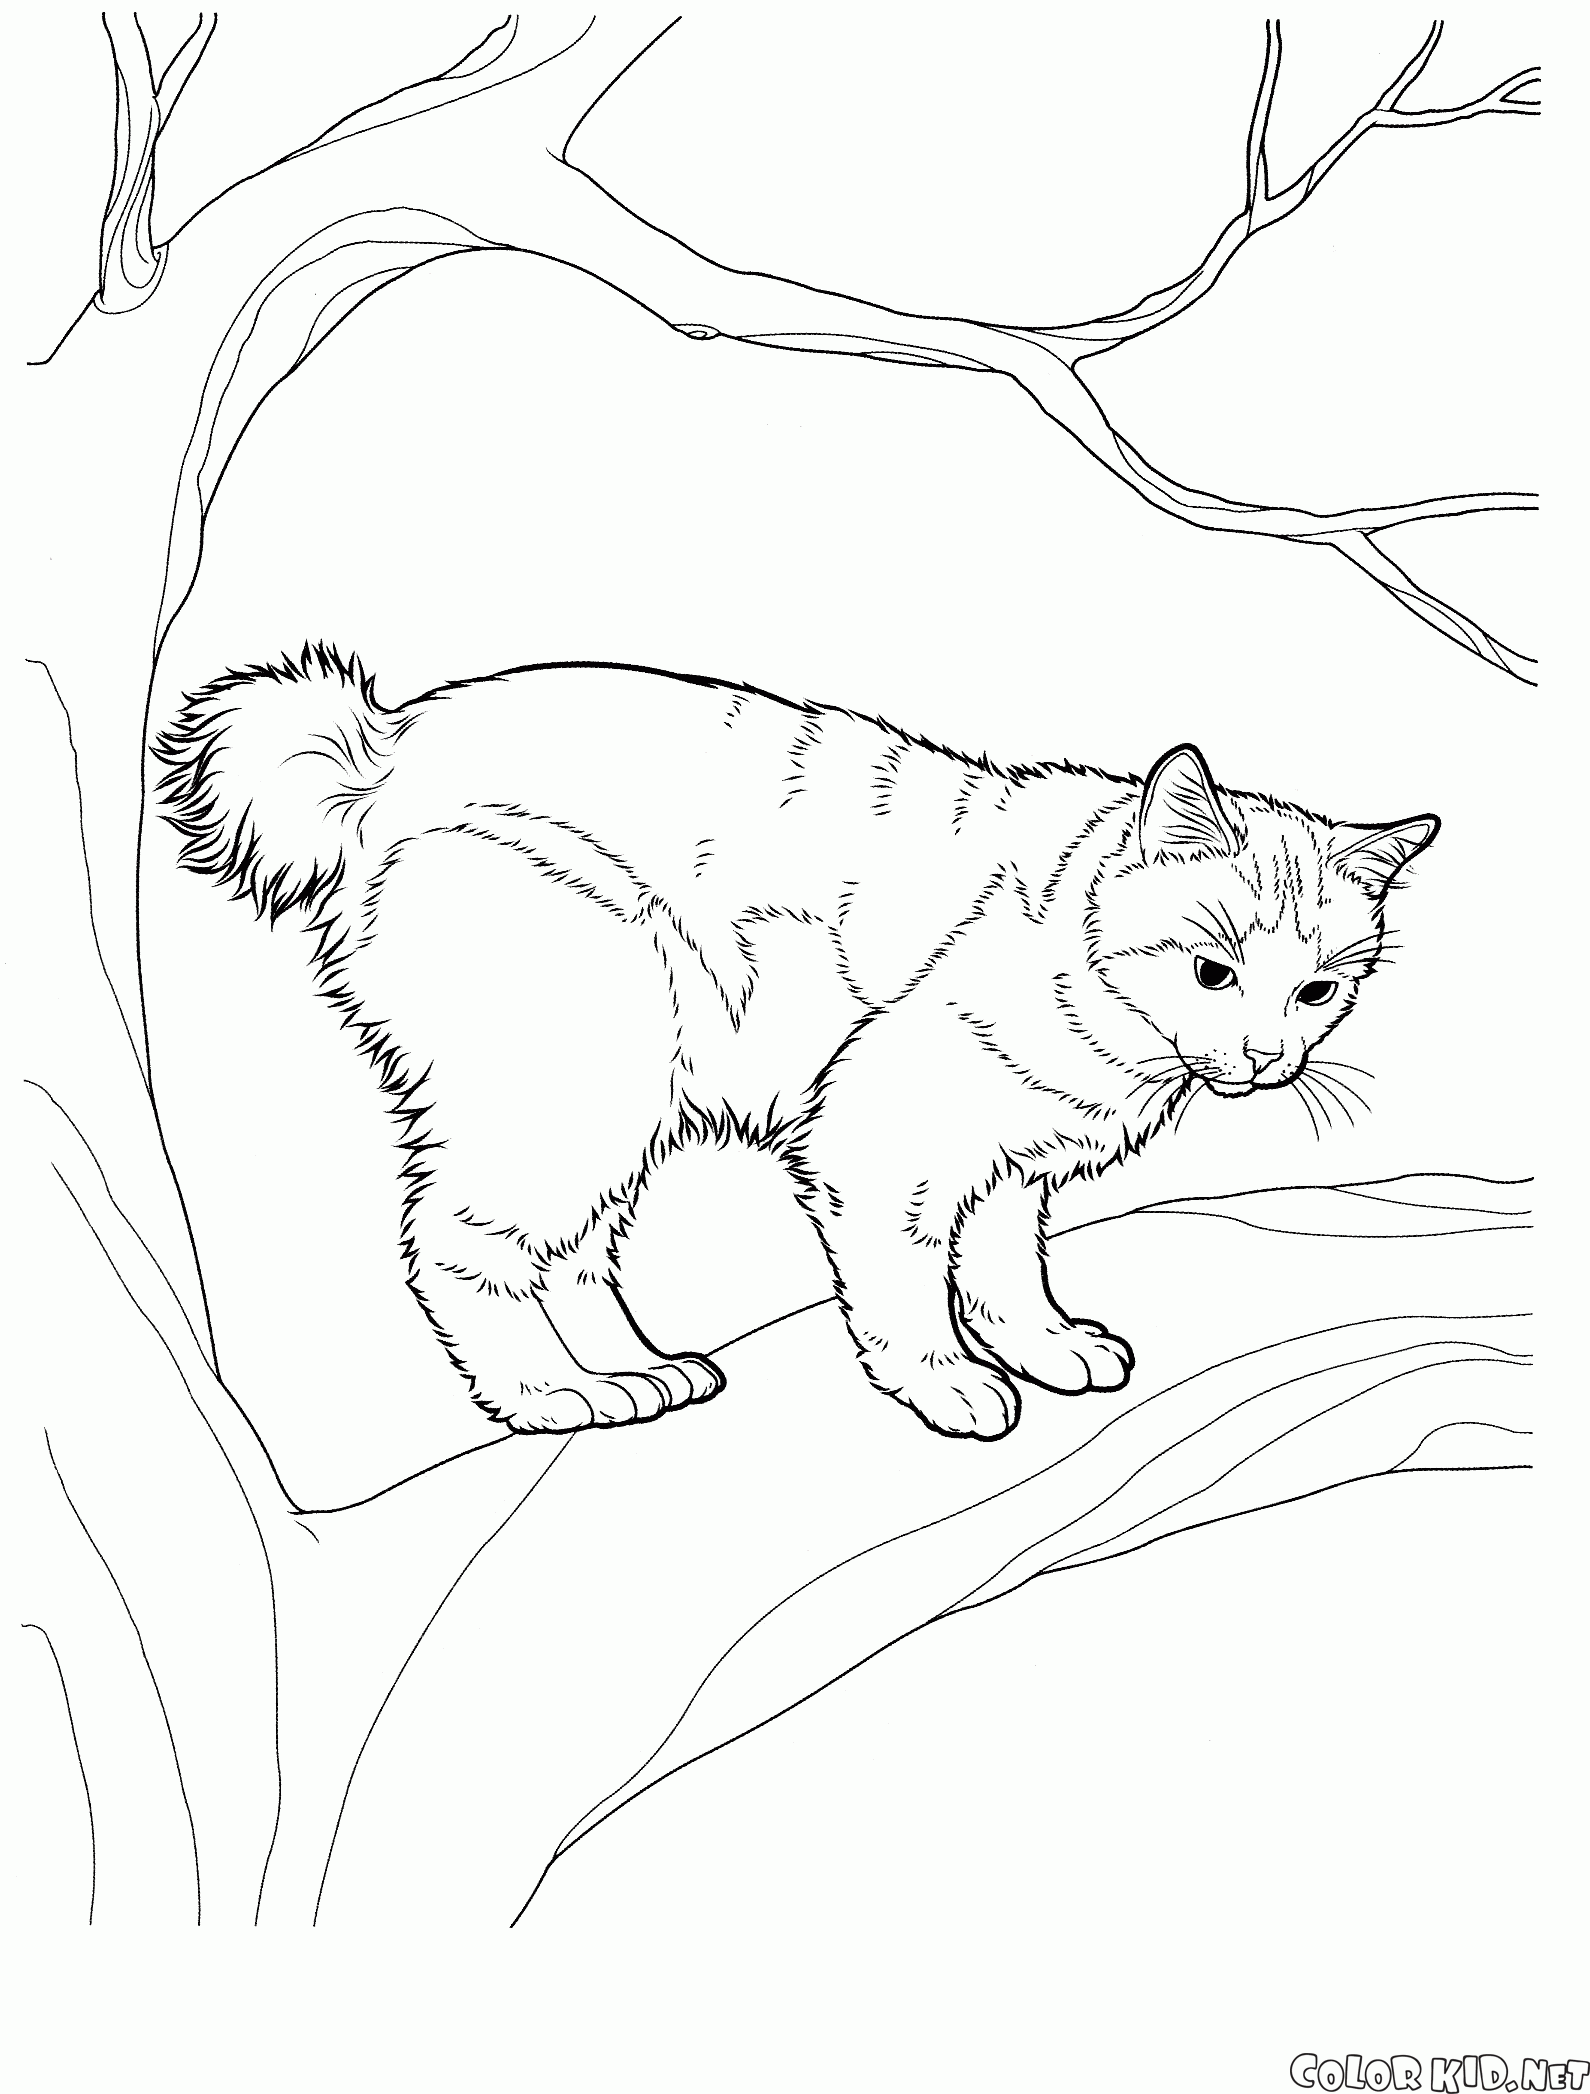 Coloring page - Cats